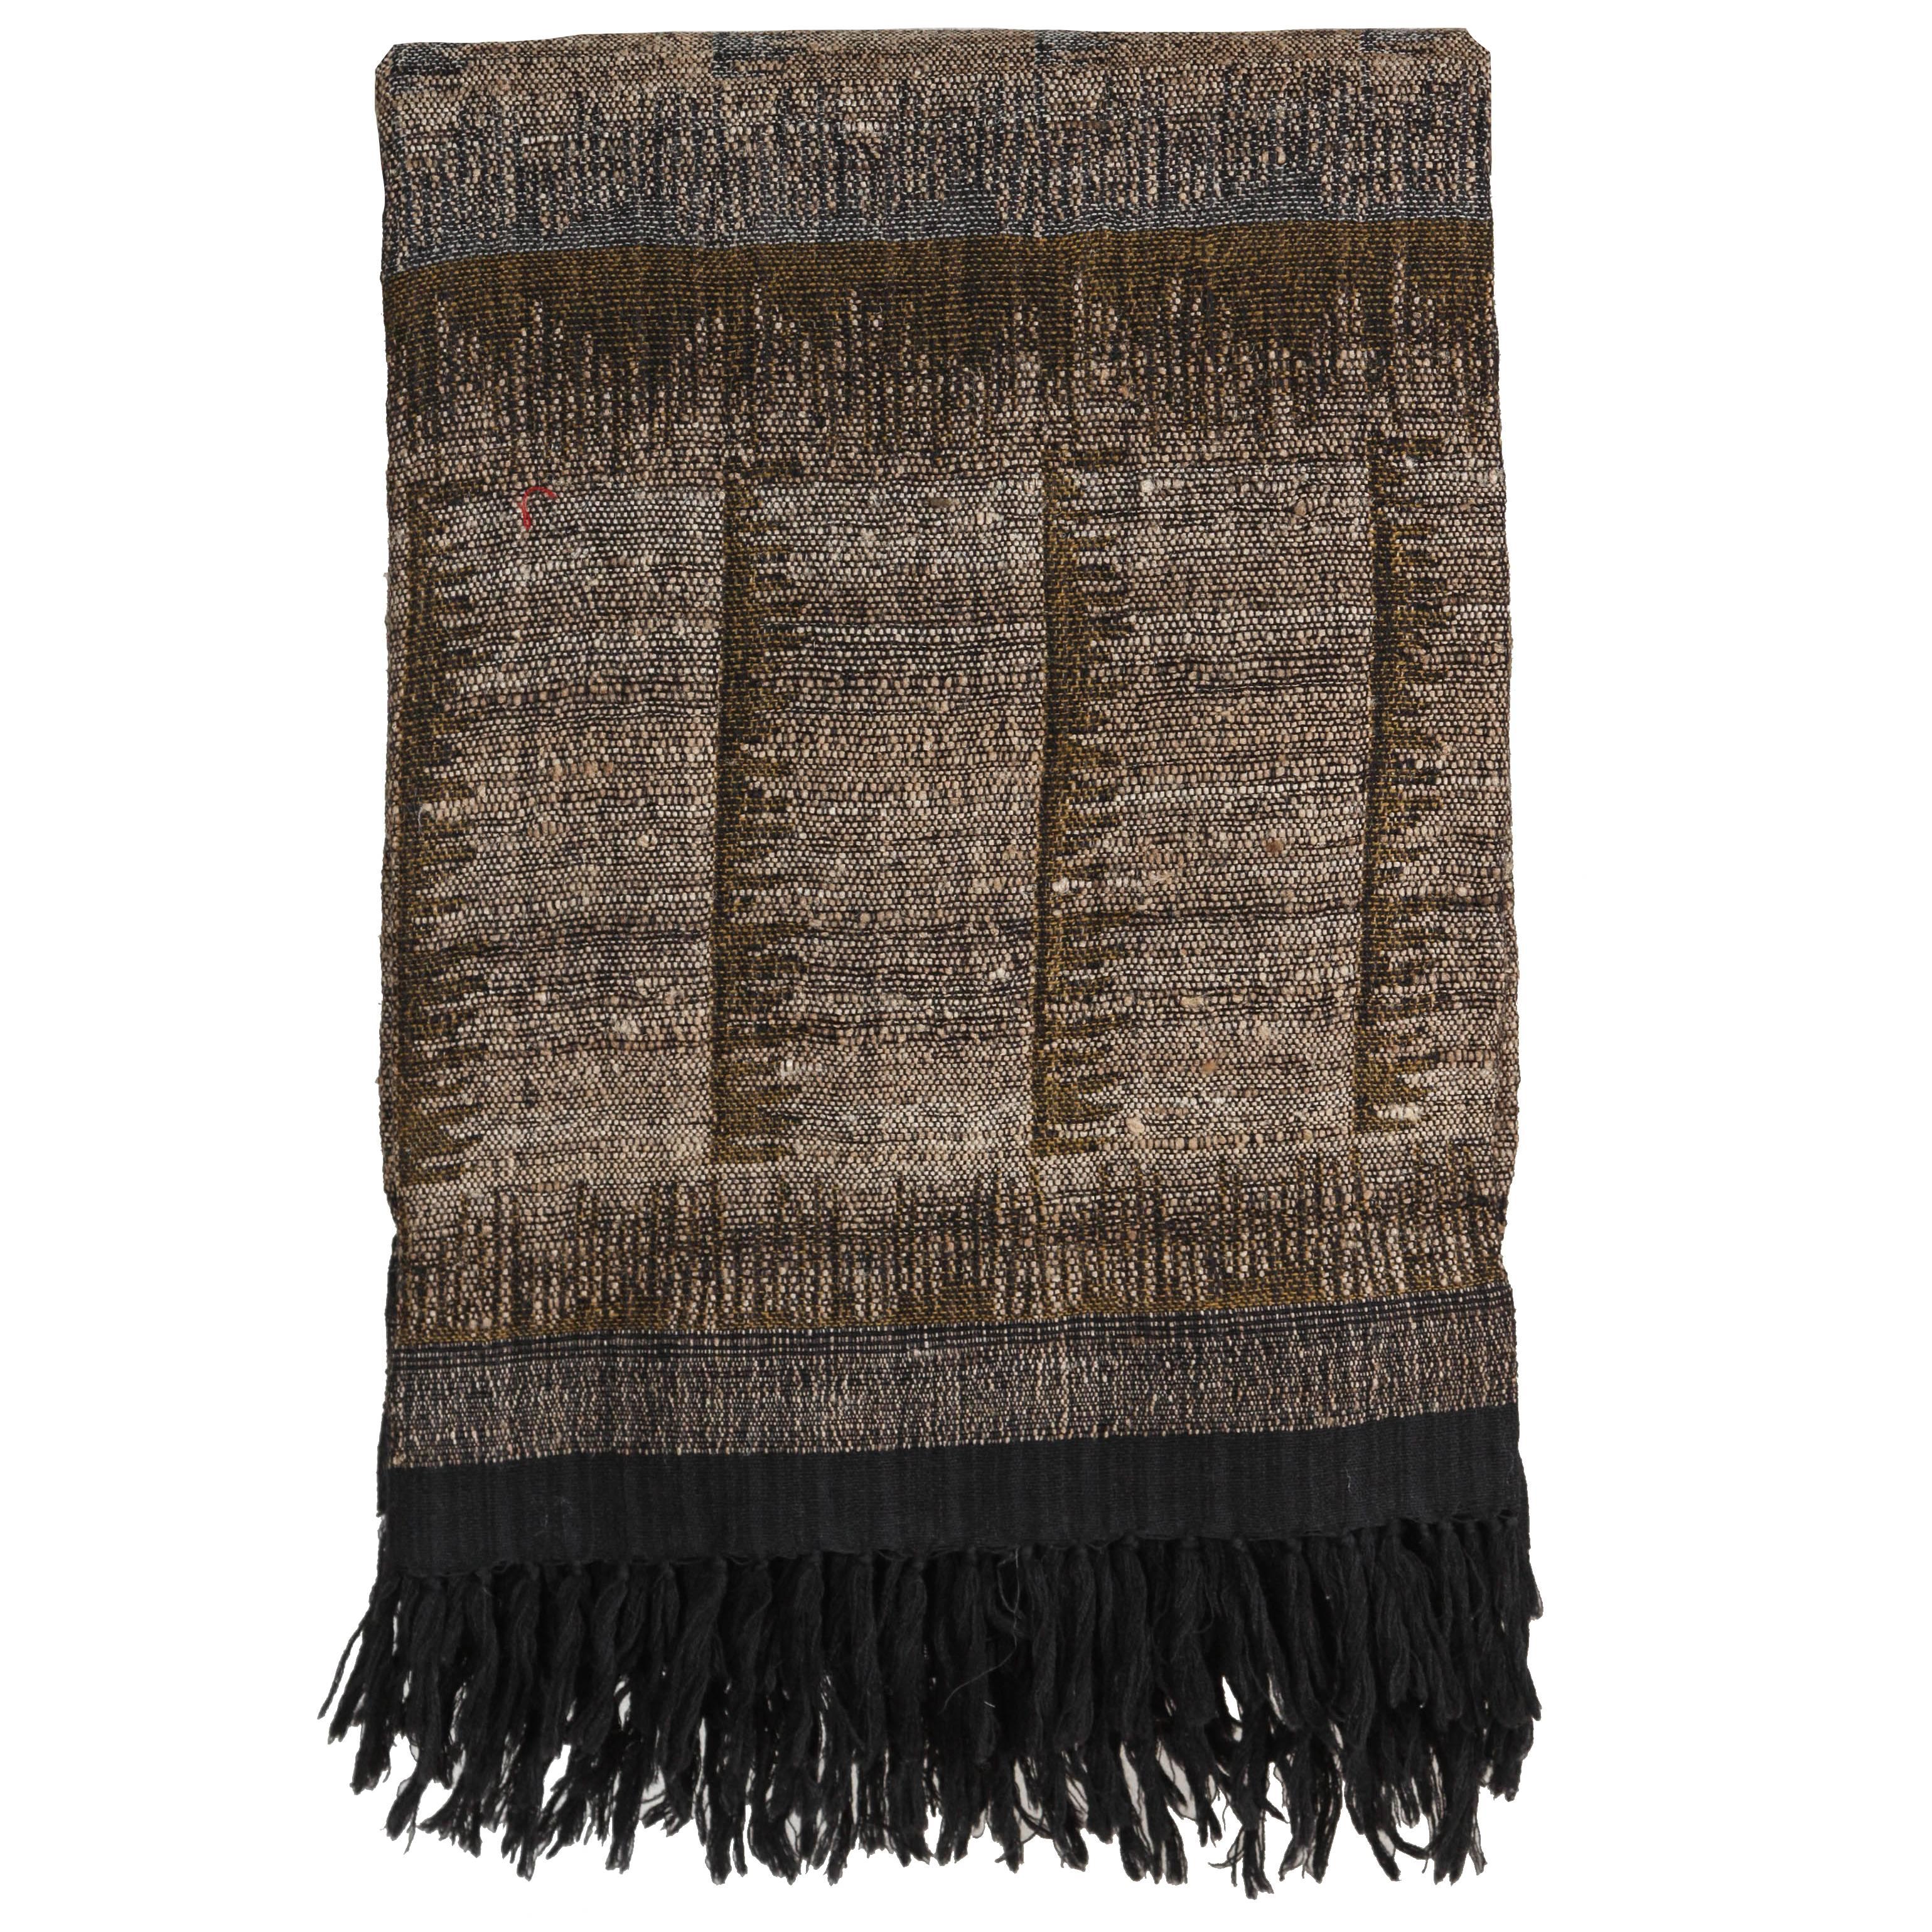 Indian Handwoven Throw in Brown, Black, Gray and Beige. Wool and Raw Silk. For Sale